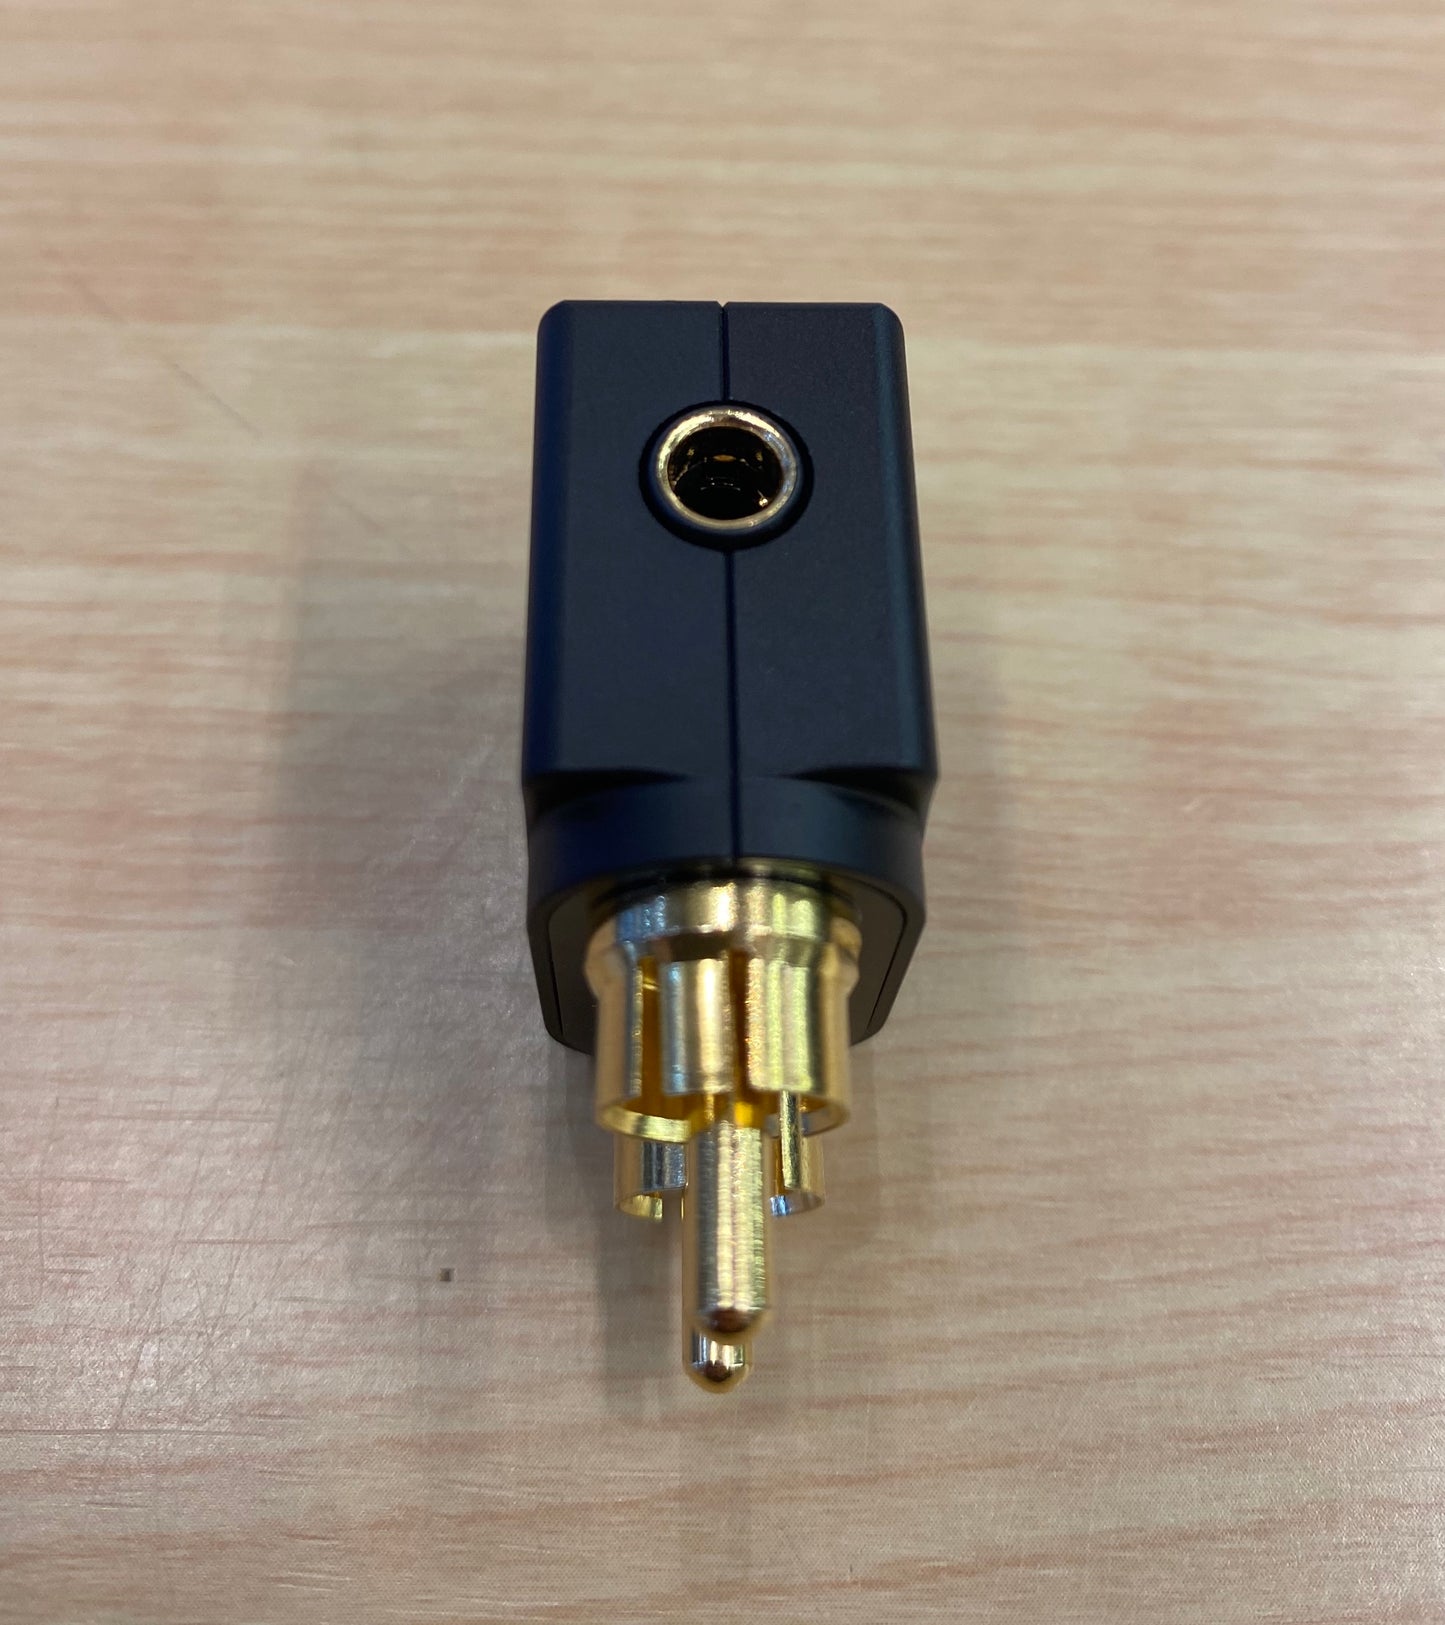 PW Audio Adapter for CHORD Hugo 2 RCA Male to 4.4mm or 2.5mm Female